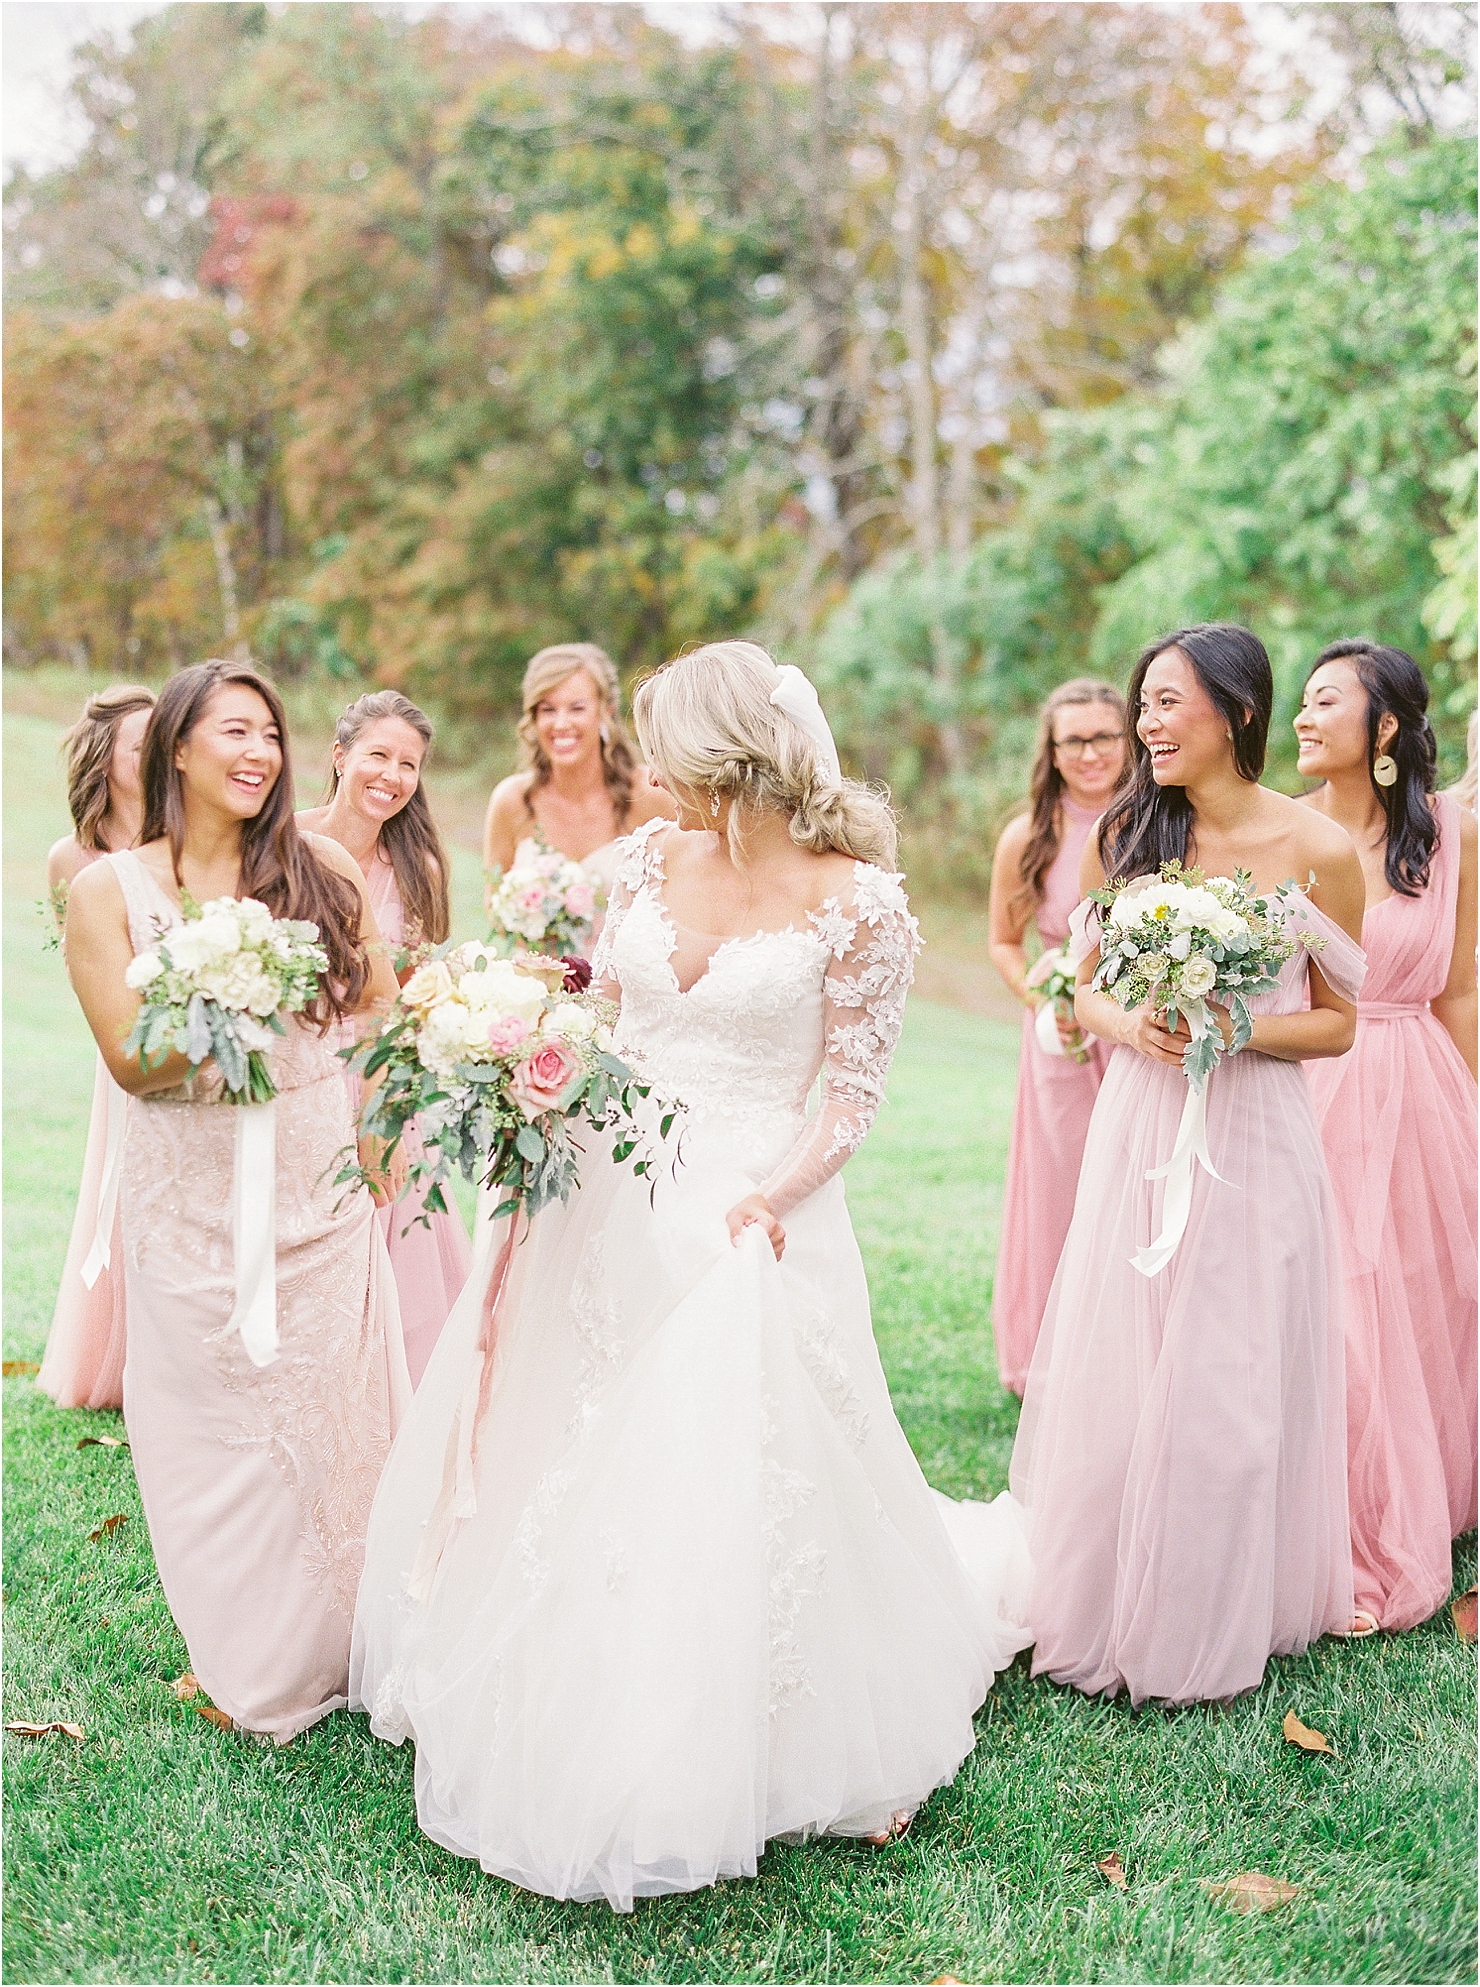 Bridesmaids Blush Revelry Adrianna Papel Blush Mix Matched Dresses Evelyn Bridal Gown English Ivy French Balcony Architecture Chateau Chateau Selah Madeline Trent Romantic Wedding Photographer